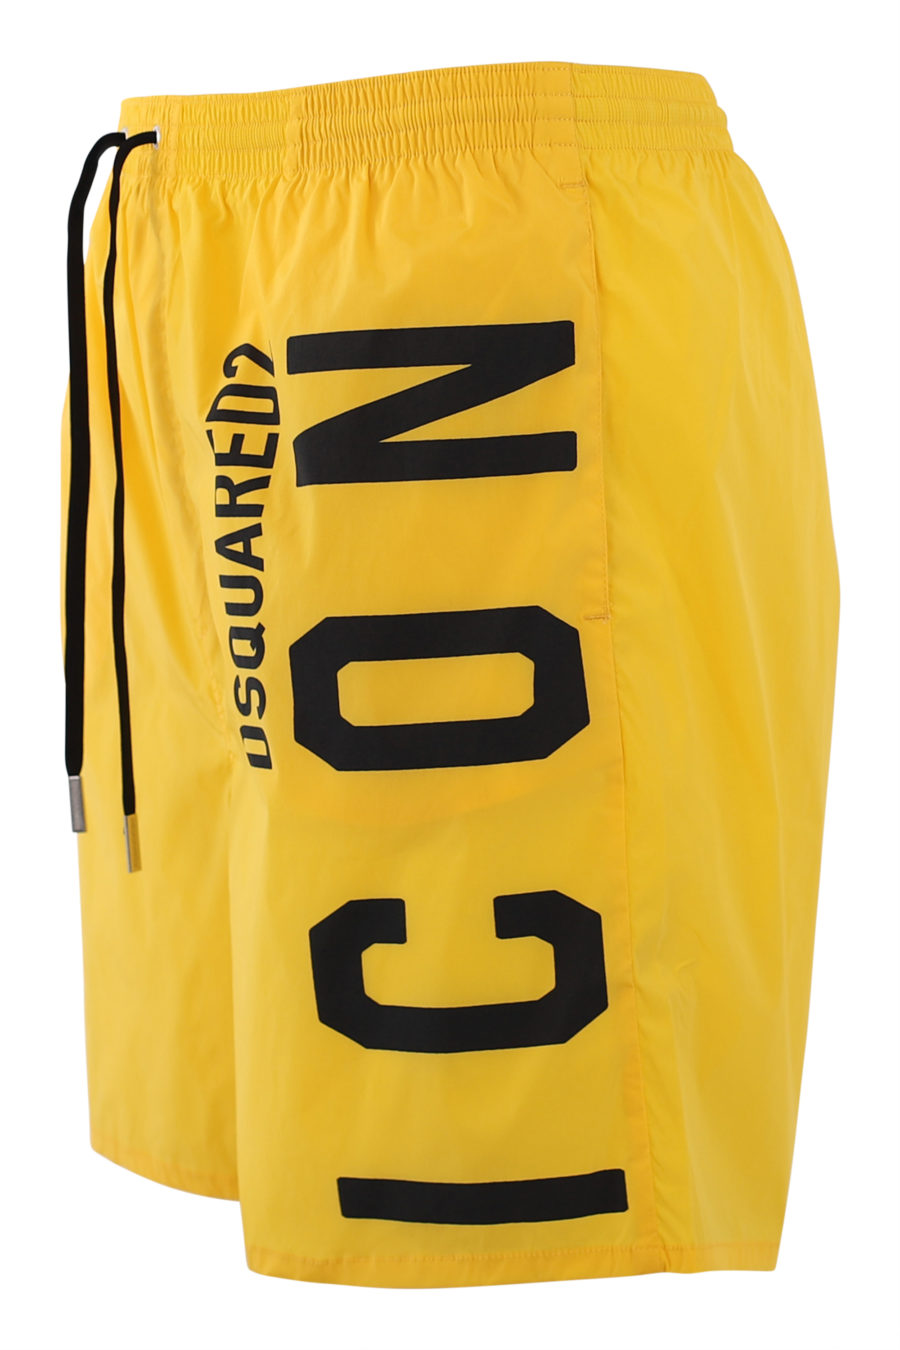 Yellow swimming costume with black "icon" logo on the side - IMG 6861